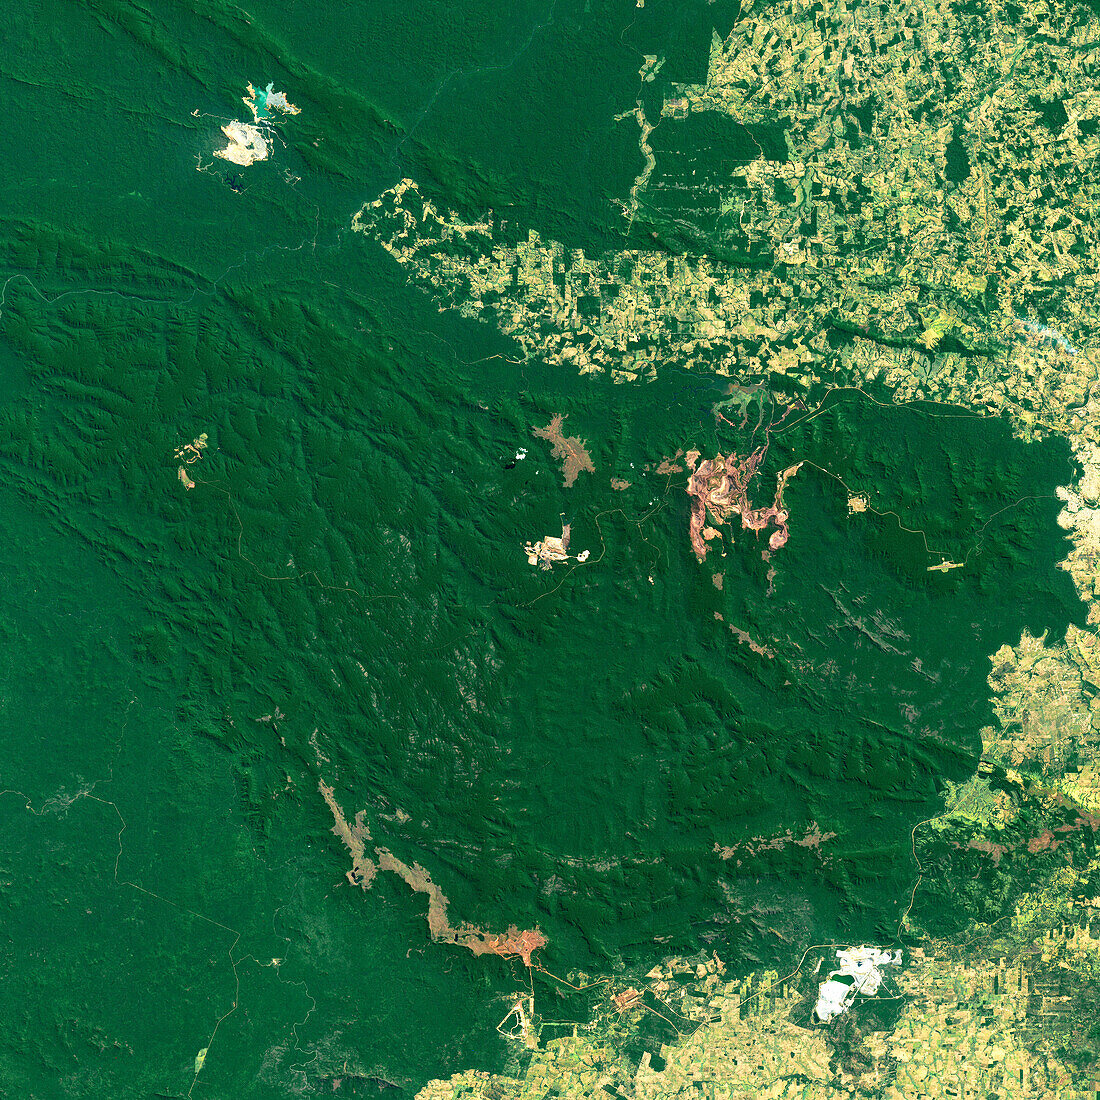 Open pit mines in the Amazon, satellite image